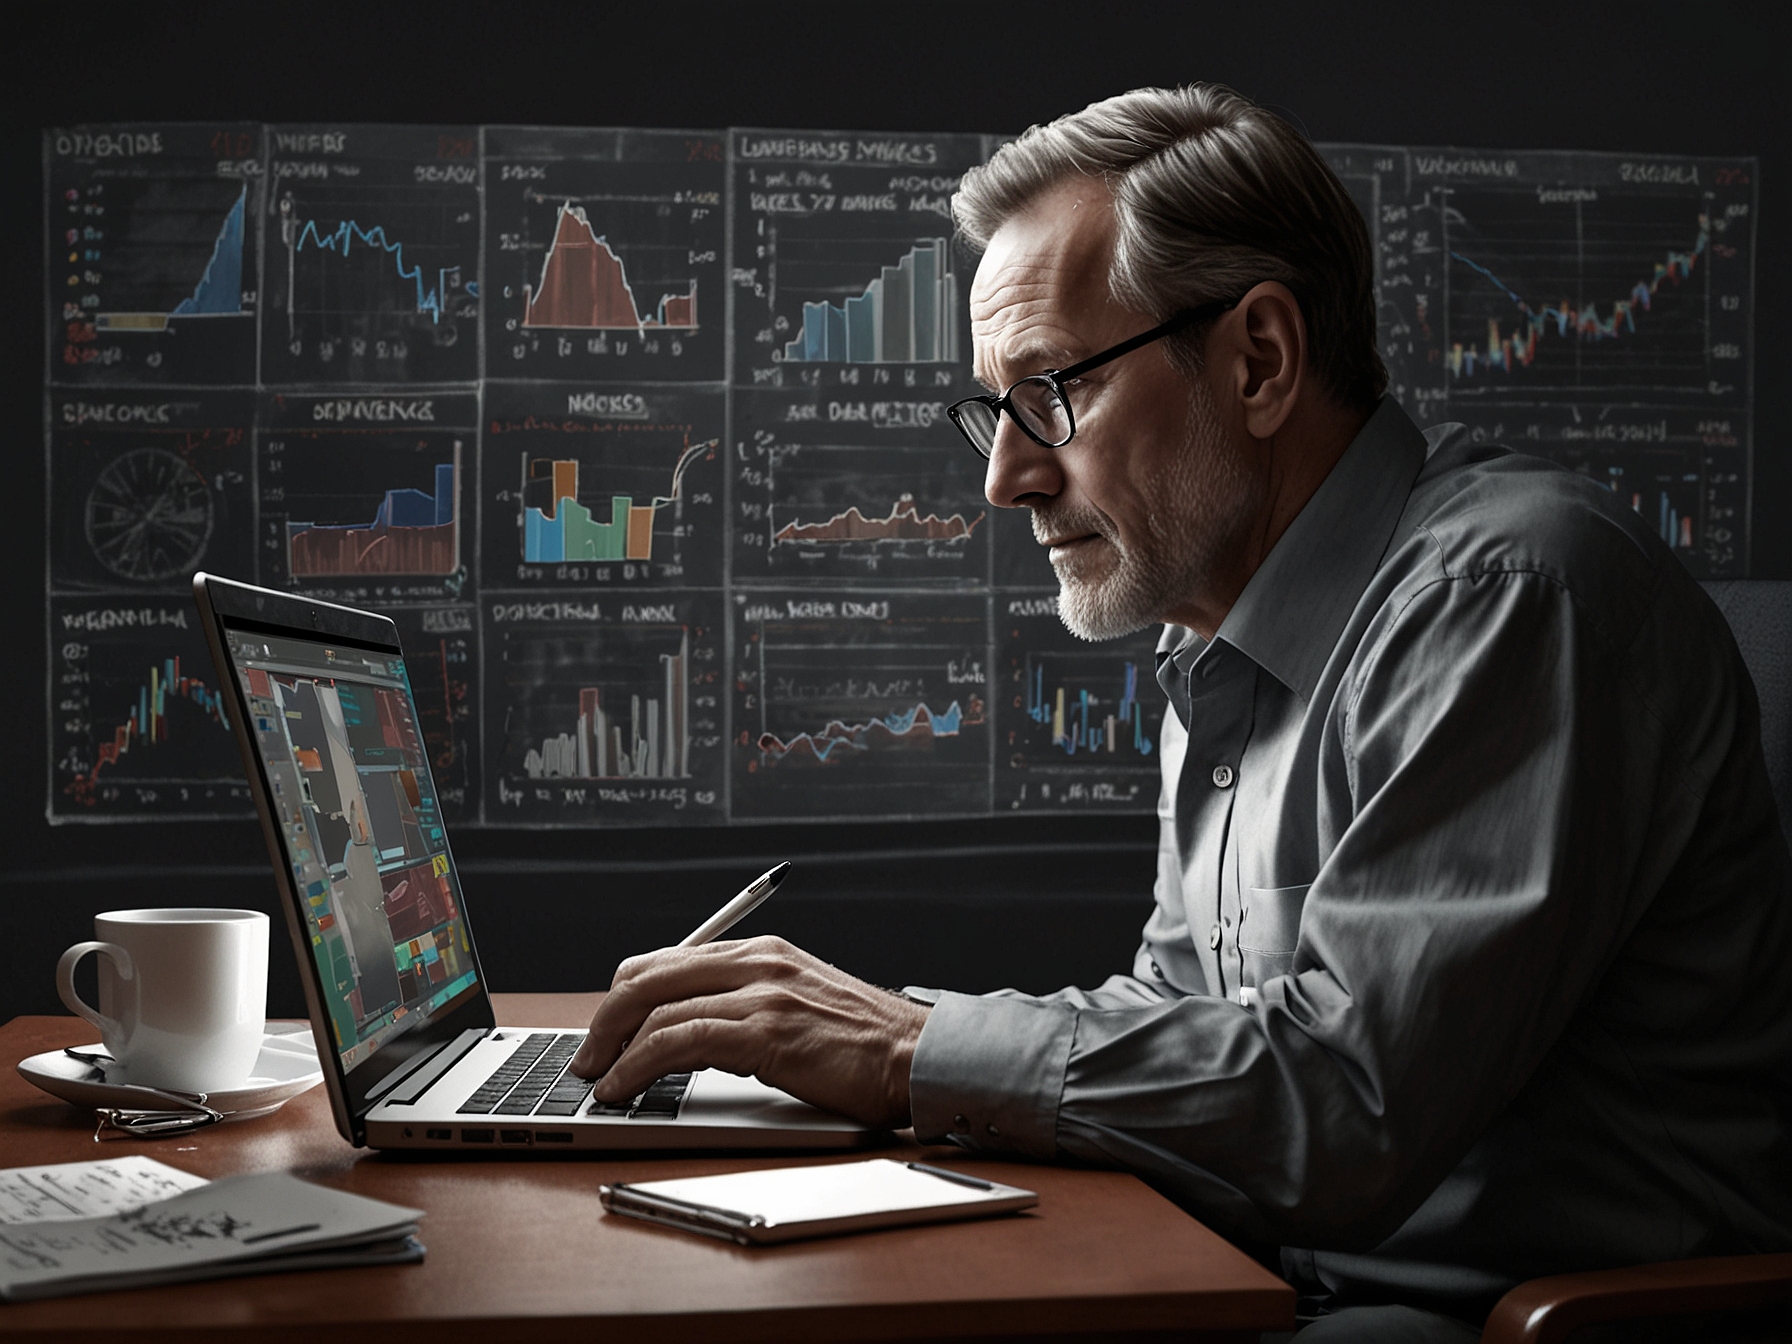 An investor analyzing financial reports and business models on a laptop to identify potential red flags and ensure transparent financial reporting, as advised by Lawrence A. Cunningham.